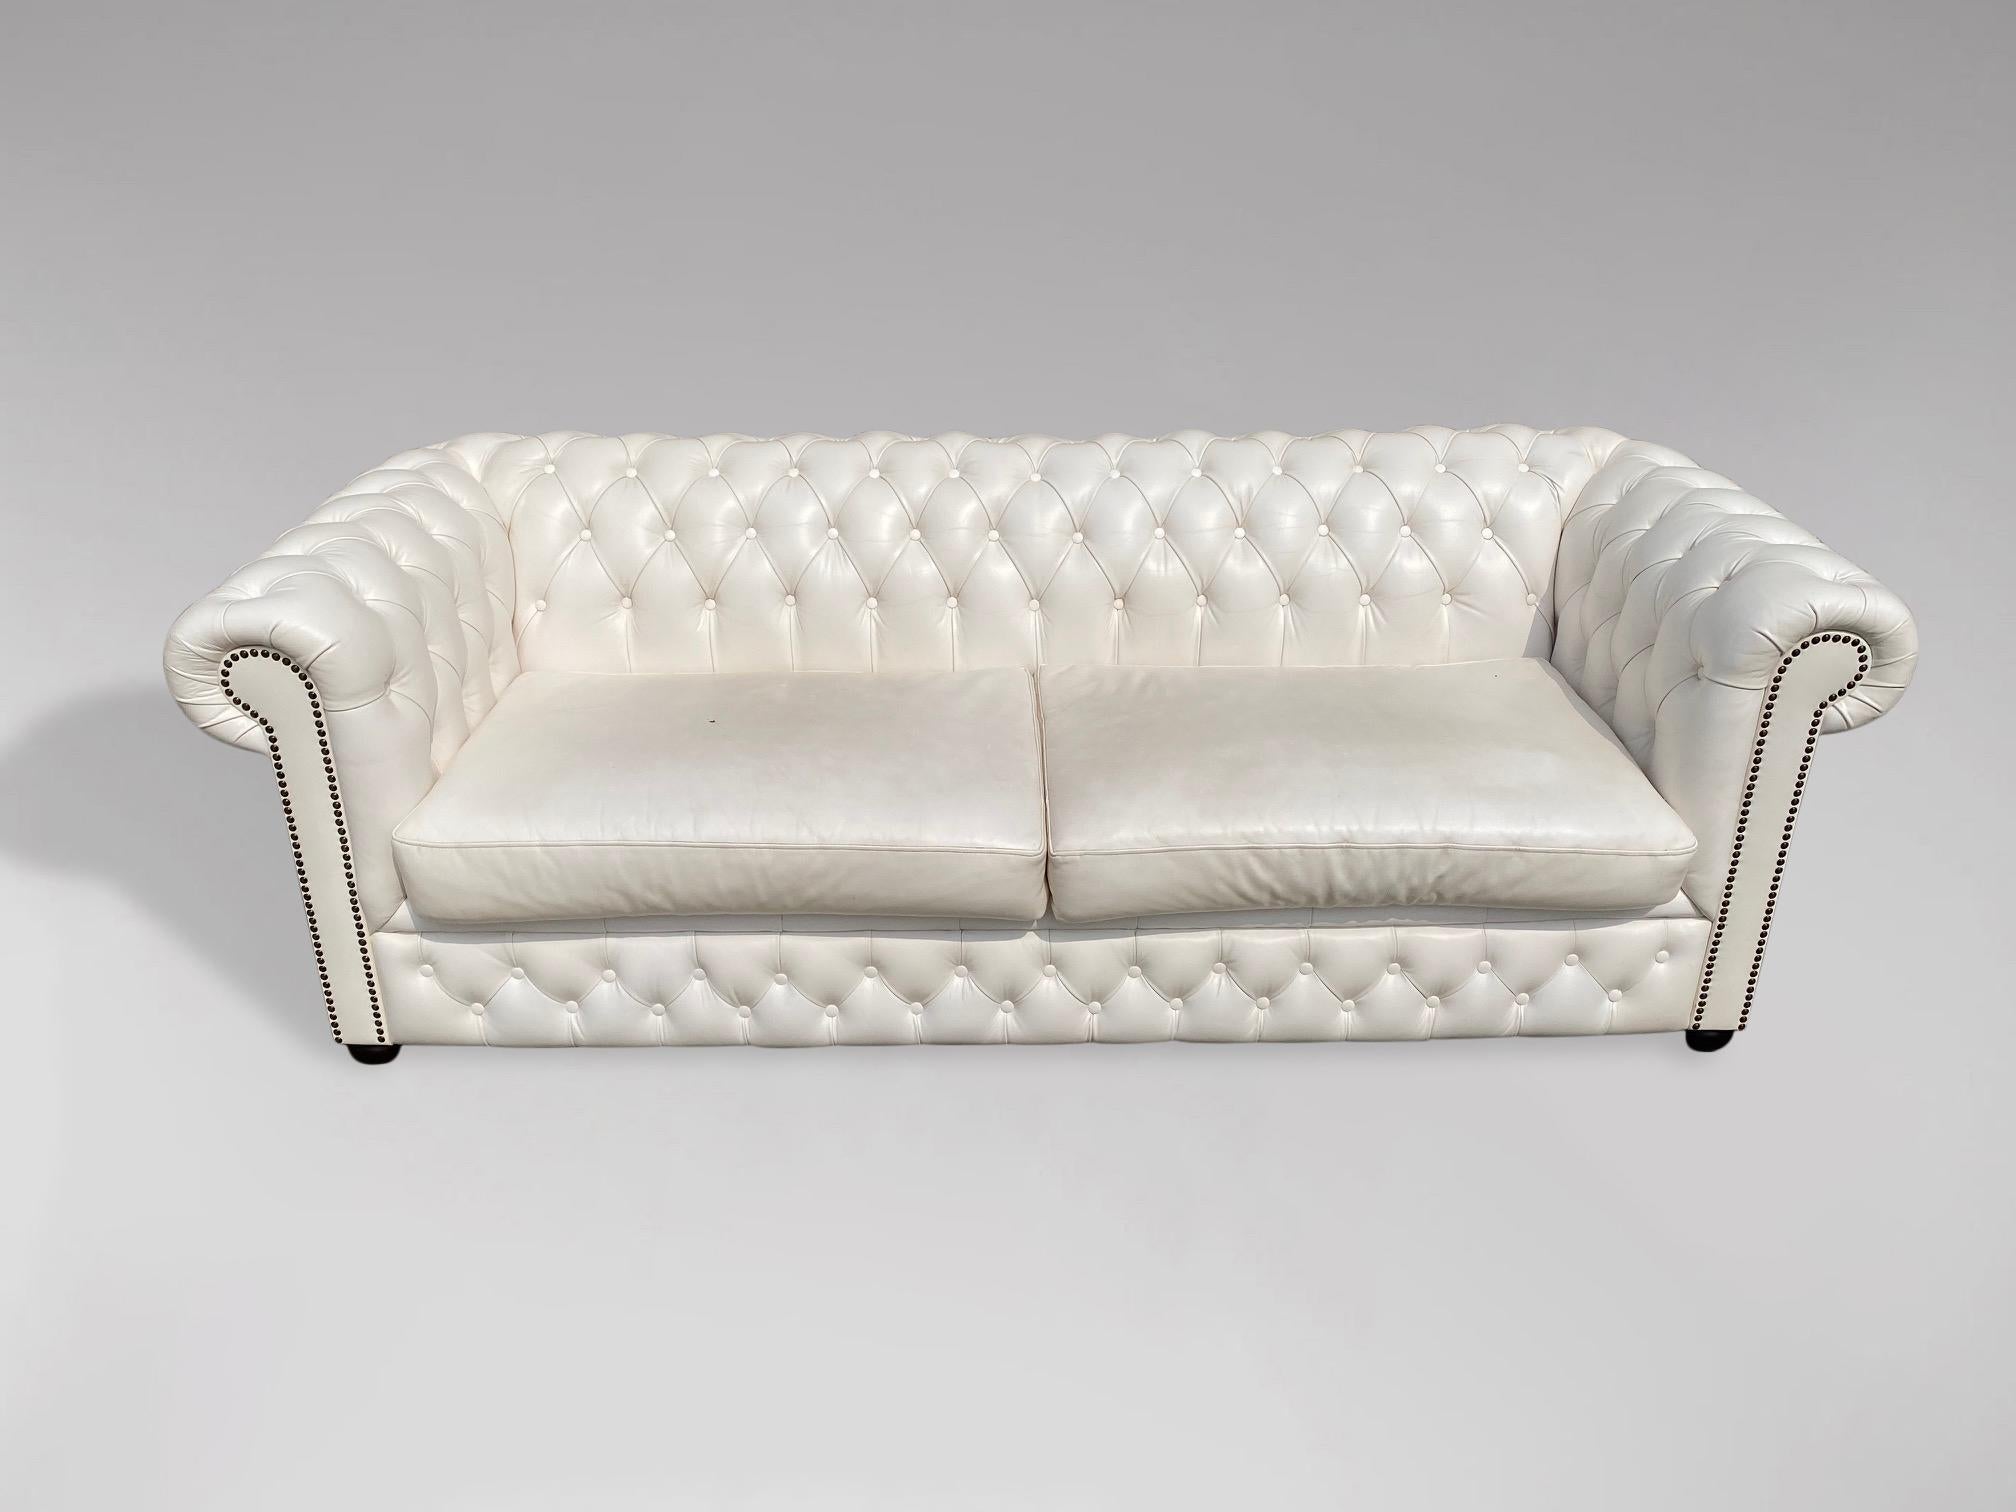 British 20th Century Three Seater White Leather Chesterfield Sofa For Sale